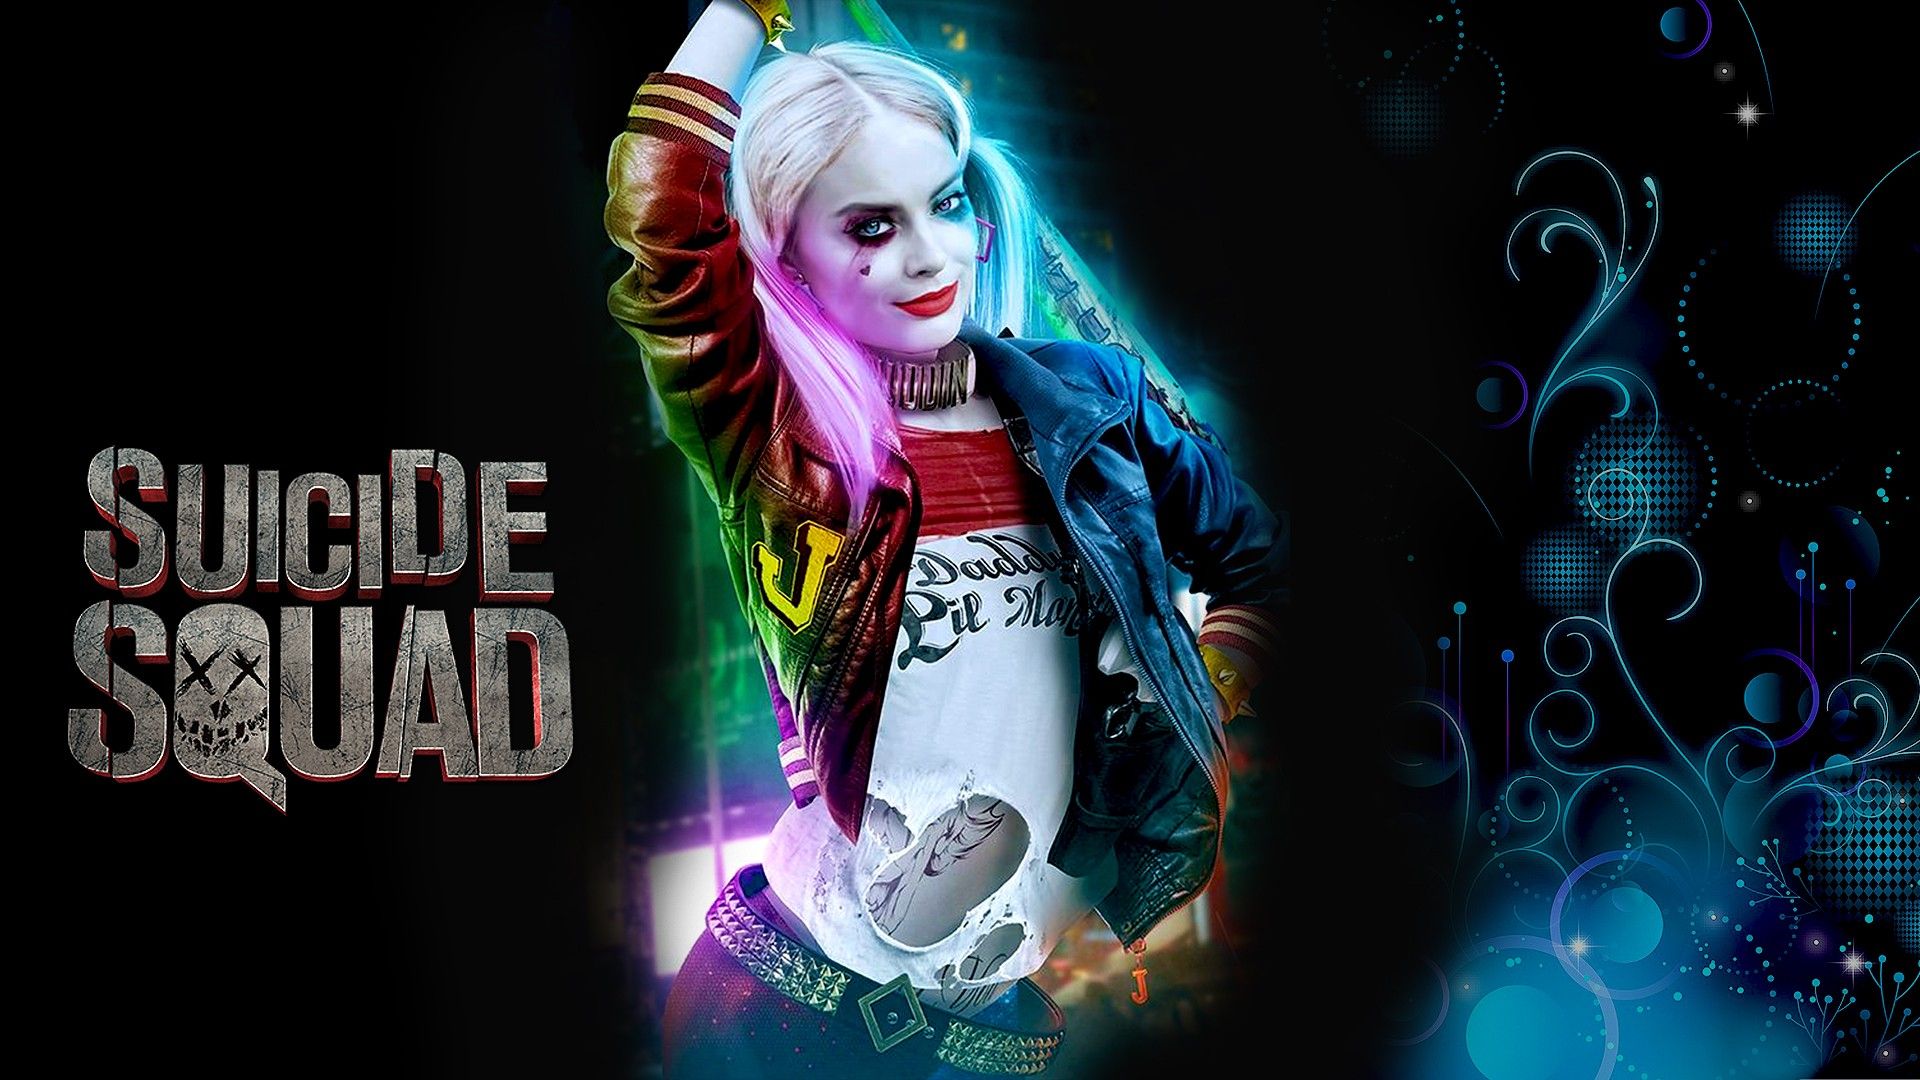 Download 1920x1080 HD Wallpaper harley quinn smile leather jacket